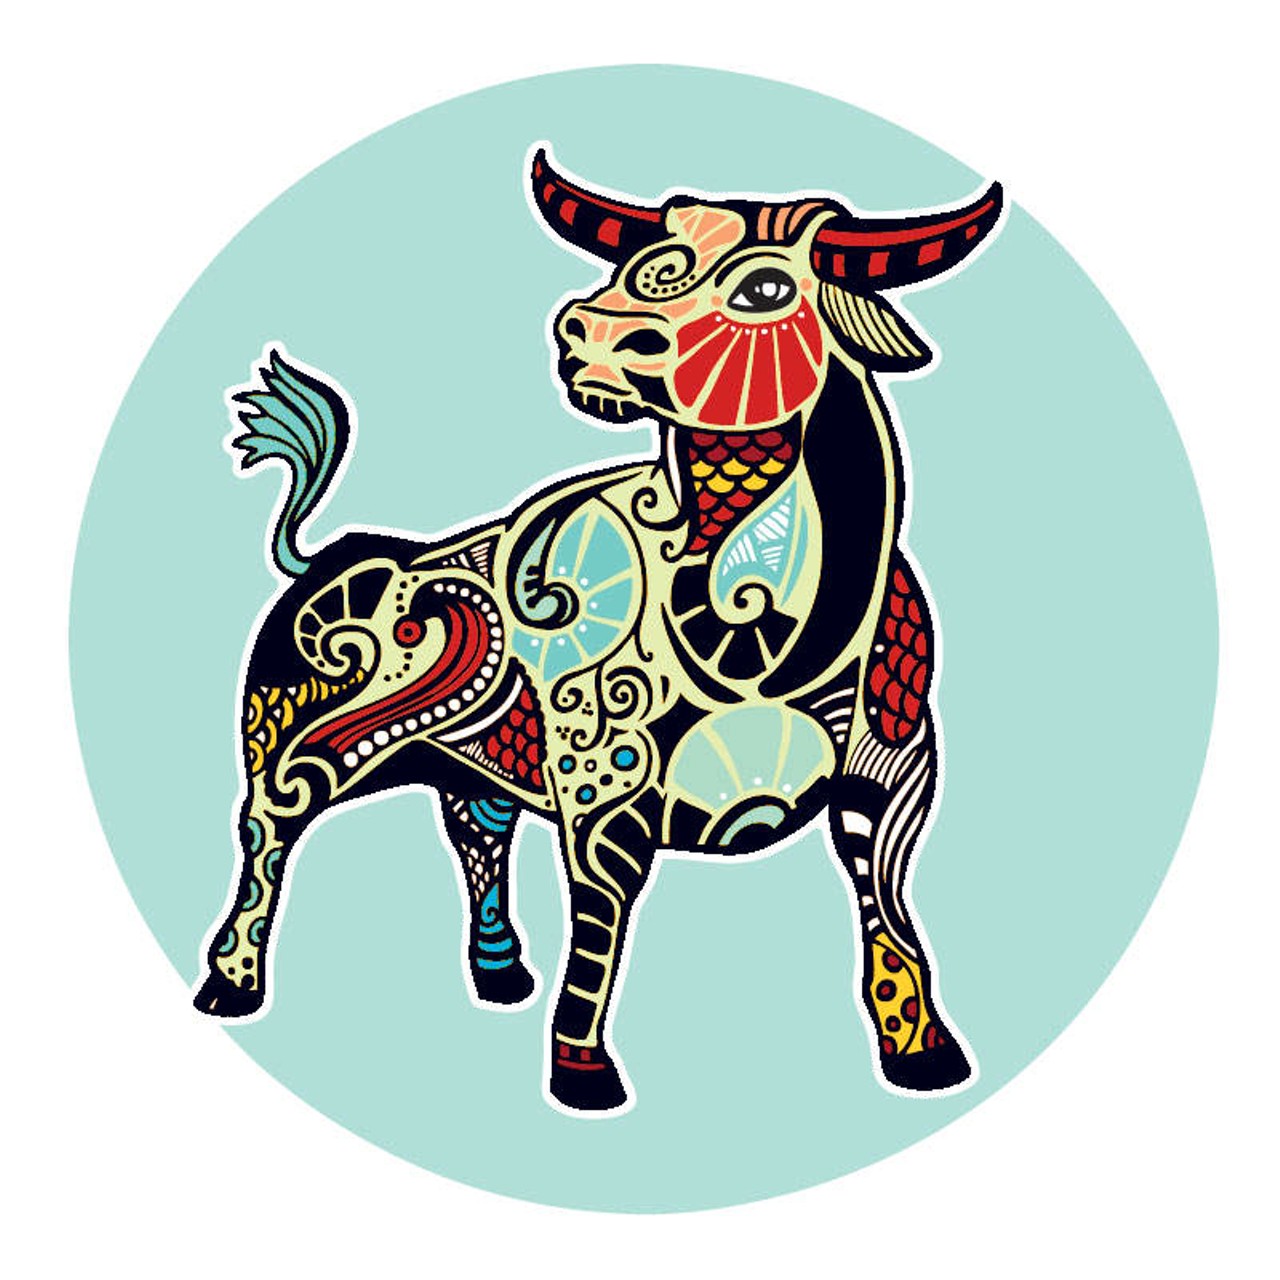 TAURUS (April 21 -May 20): 
Don&#146;t be surprised if doors start opening for you. It looks like you have a chance to make radical changes at a time when you didn&#146;t think it was possible. As long as you can tell the difference between what&#146;s real and what isn&#146;t, you&#146;ll be able to make the most of this. Those of you who think you&#146;ll be better off if you don&#146;t rock the boat may come to regret that decision. The fine line between caution and impulse always needs to be honored, but that doesn&#146;t imply that one is better than the other. This time, you could err on the side of impulse and get away with it.